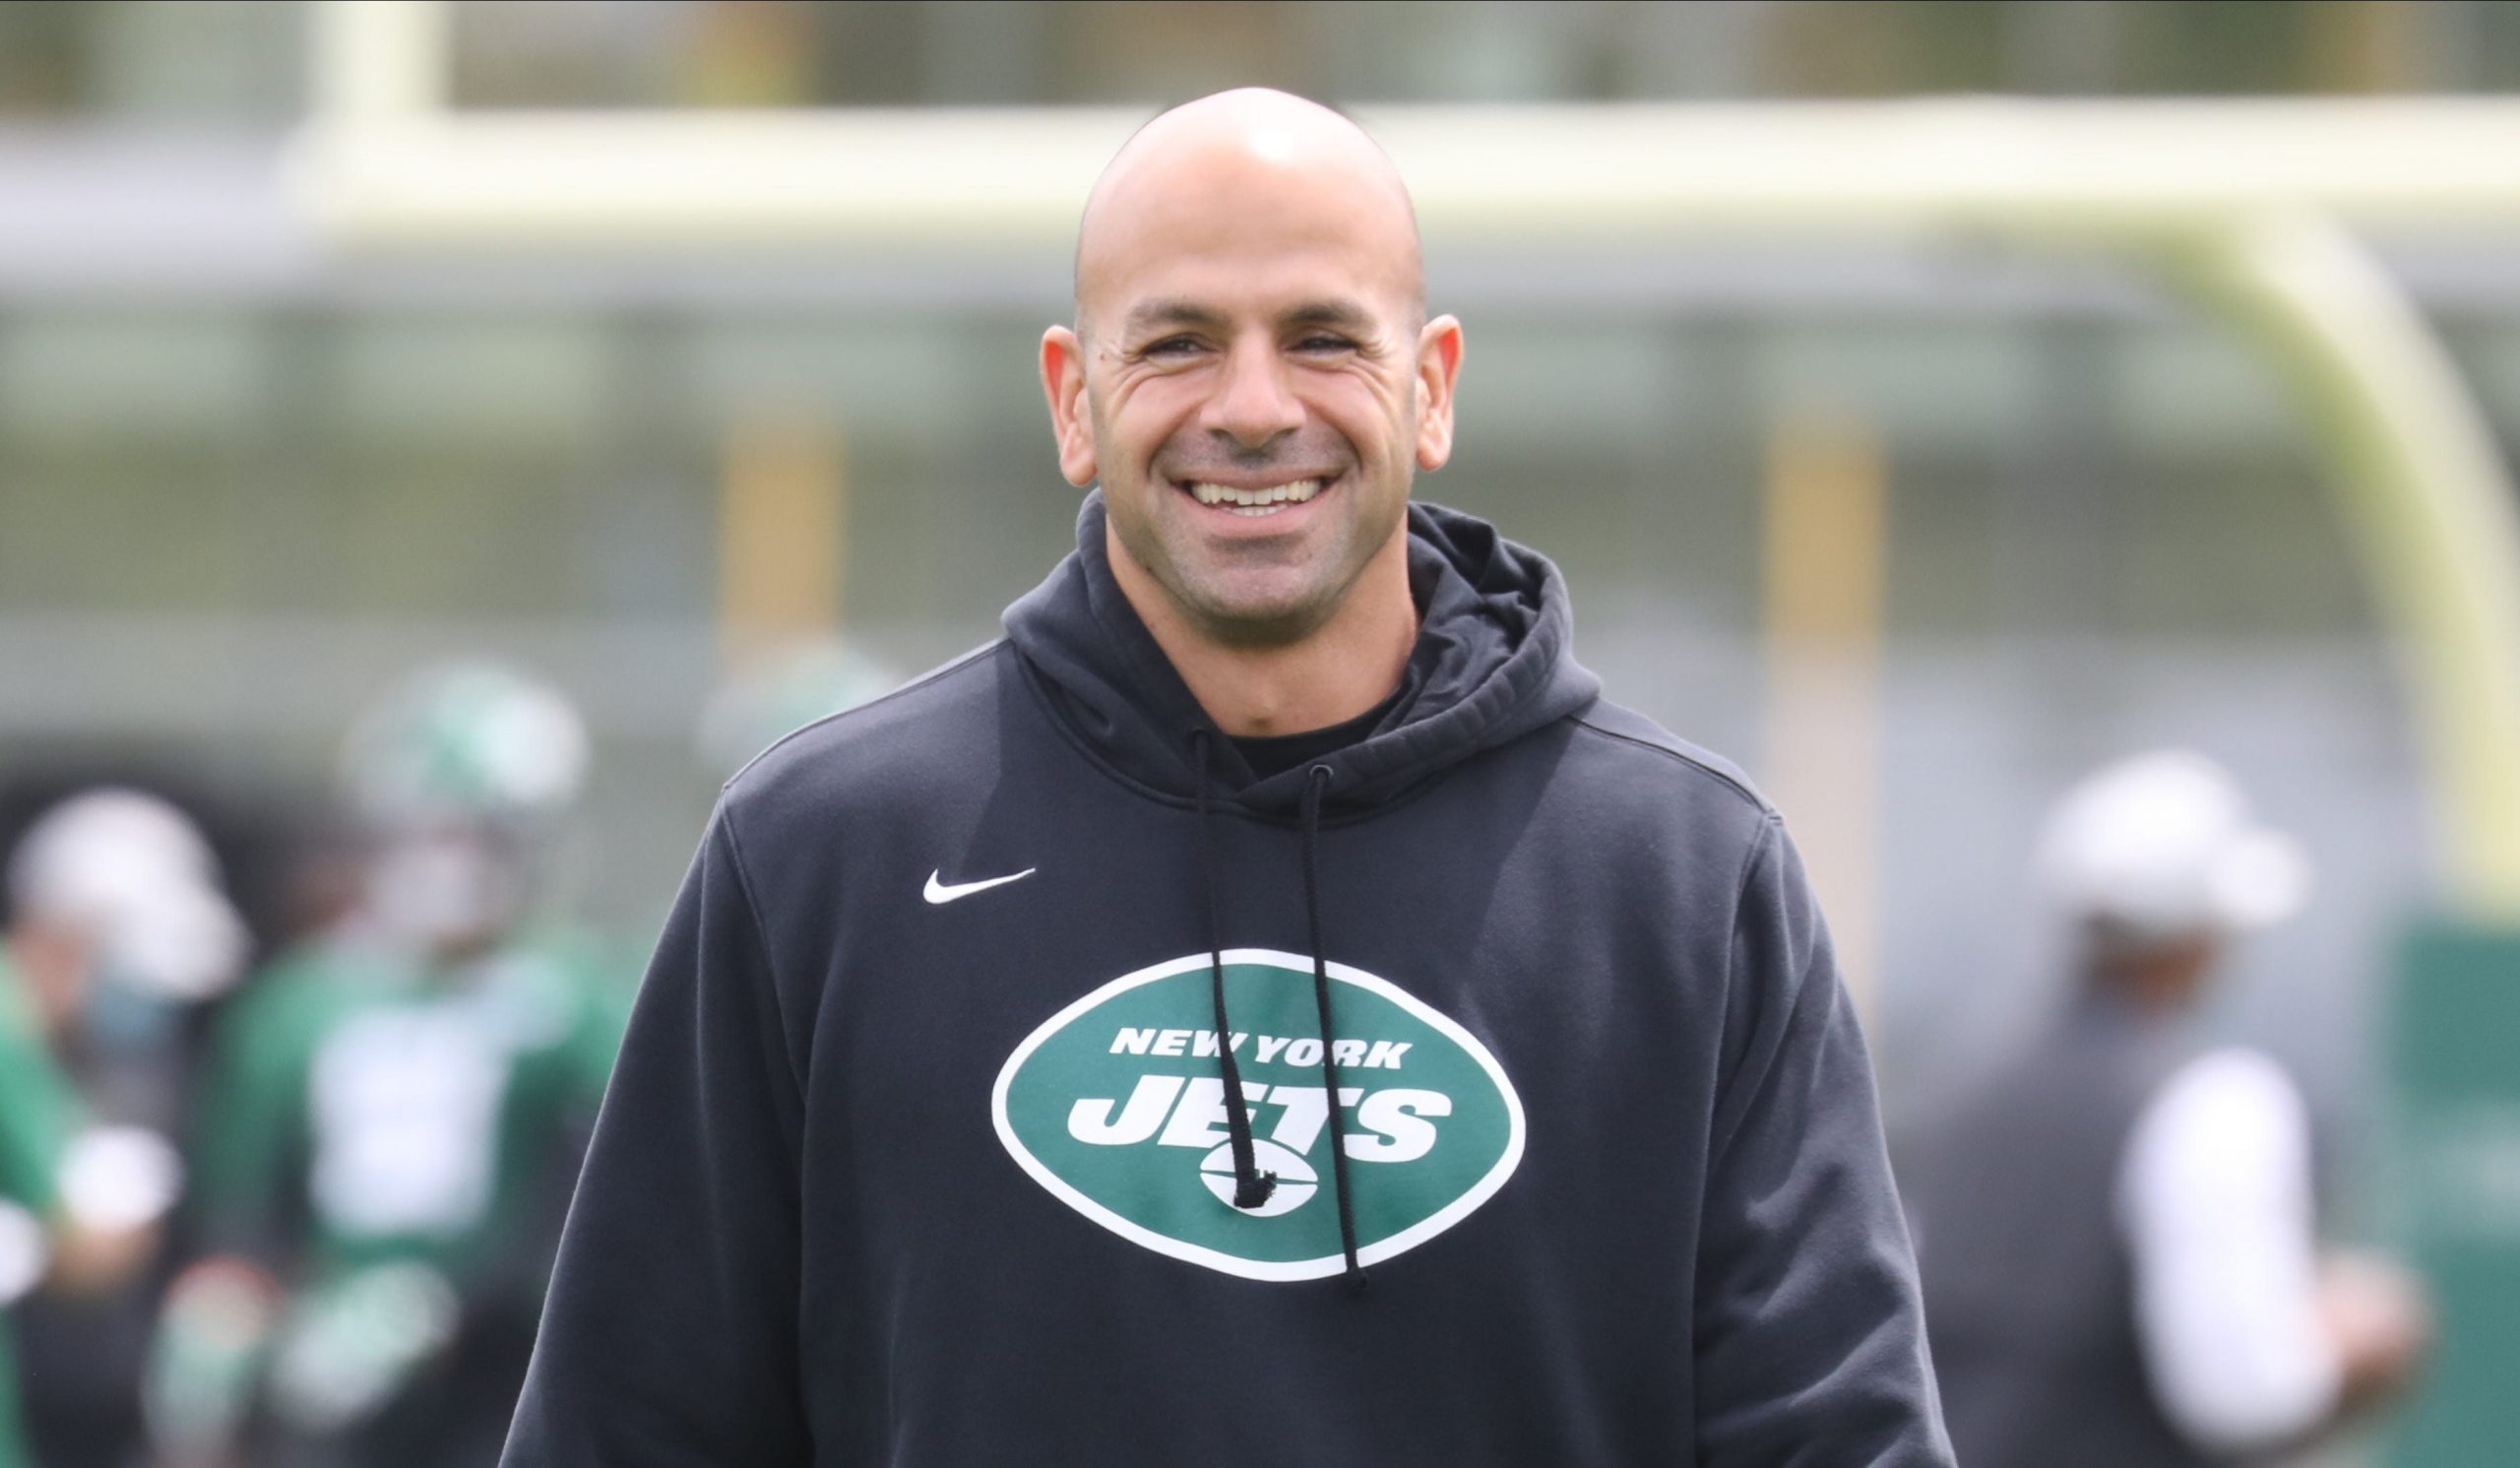 Robert Saleh had his “Welcome to being an NFL head coach” moment